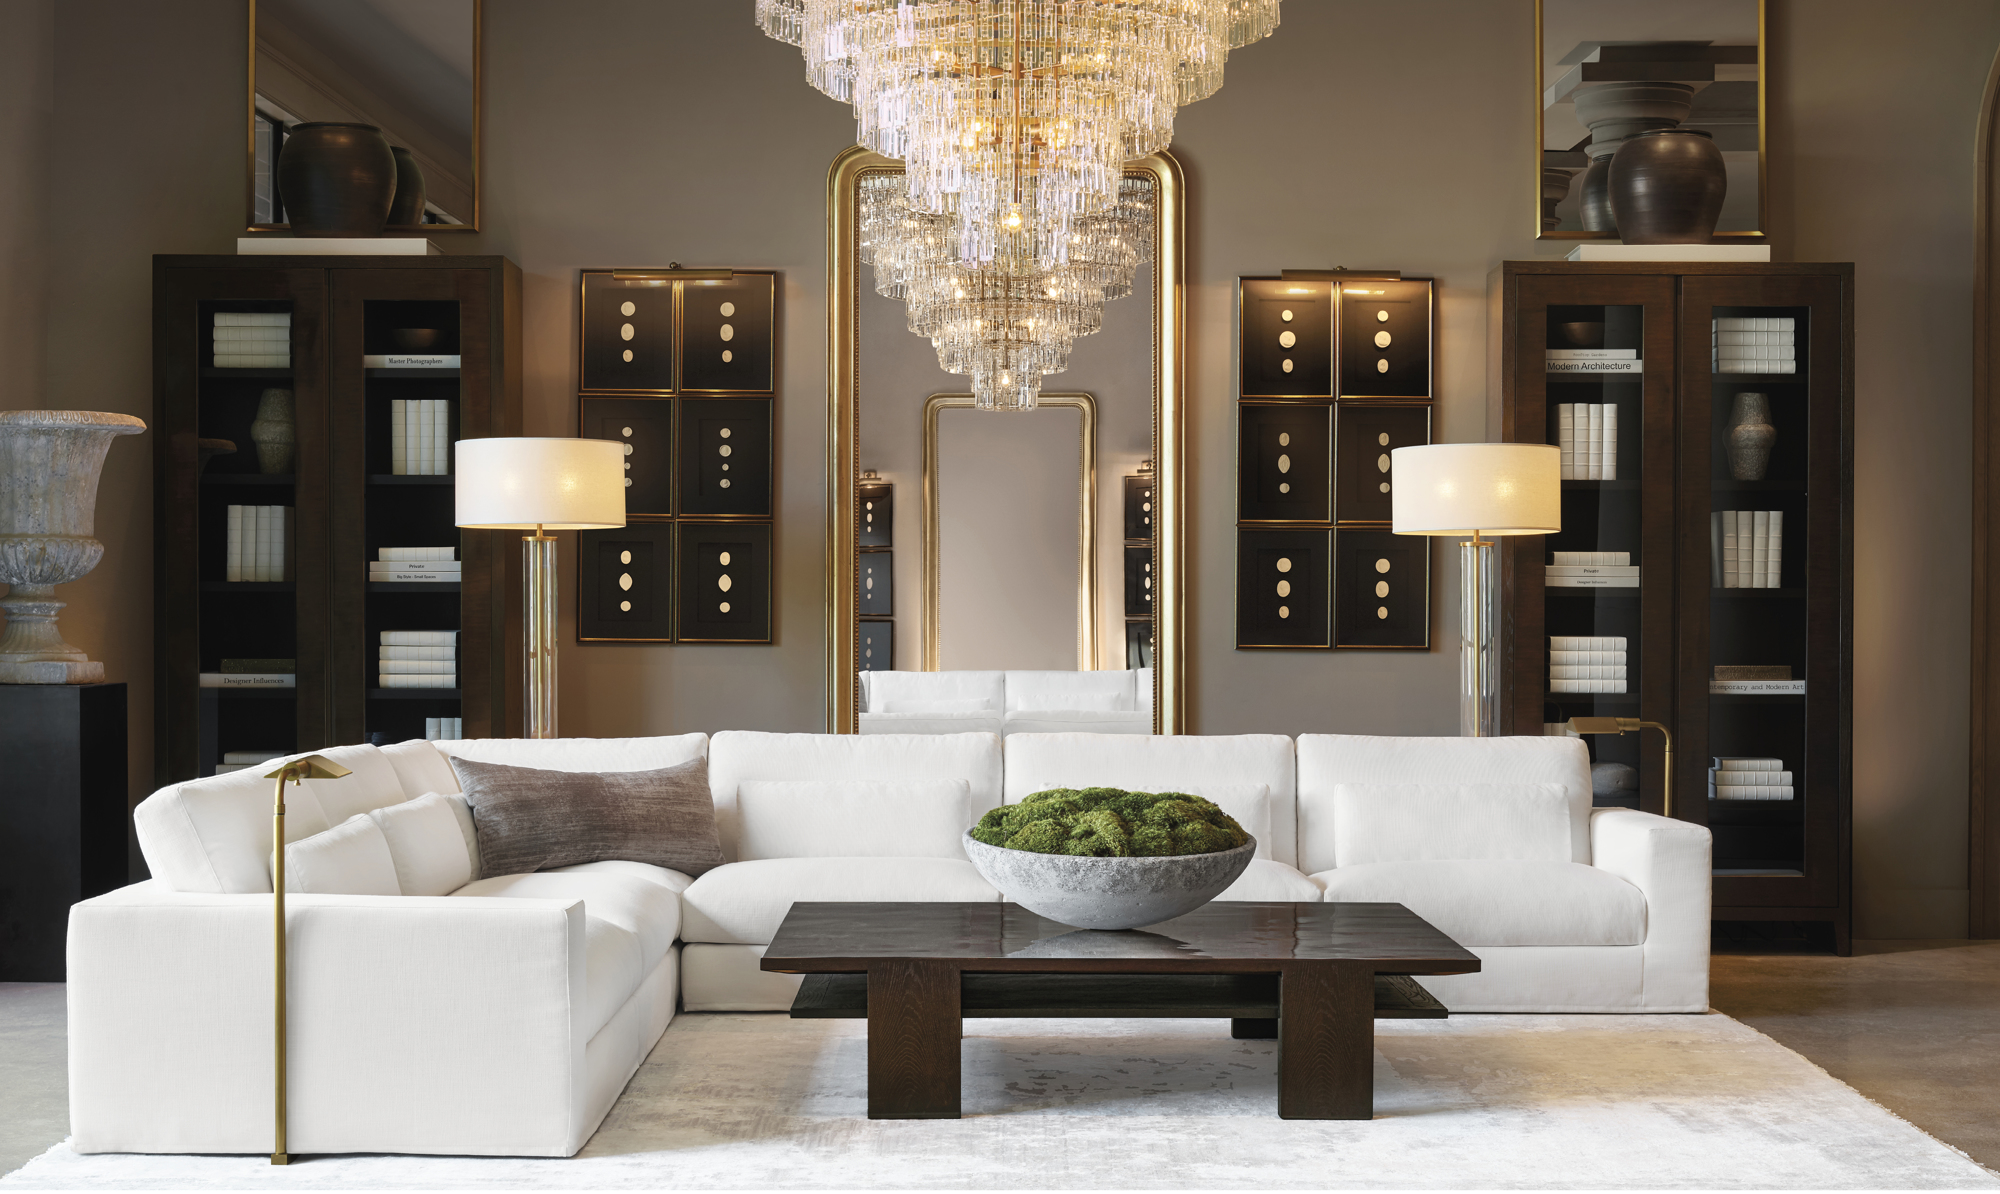 The ground floor of the store includes RH Interiors and its Lugano sectional couches.